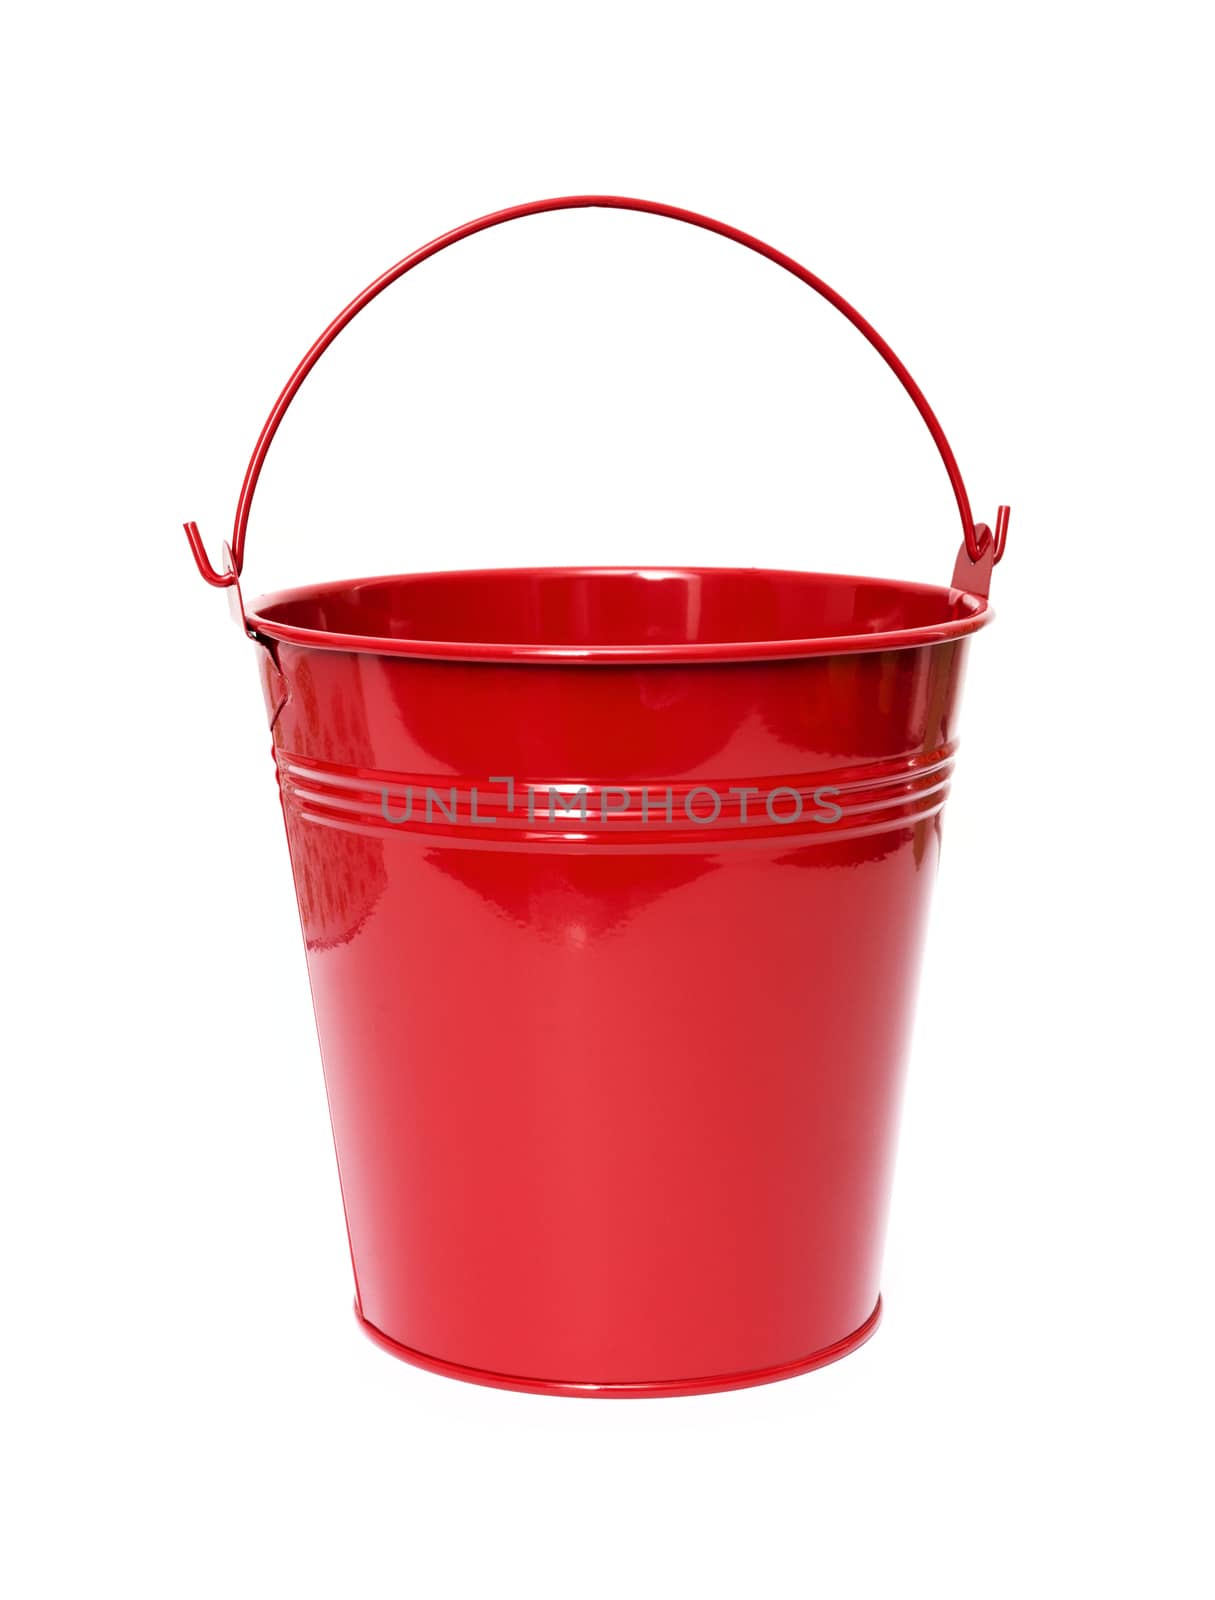 Red Bucket, Isolated on white background by DNKSTUDIO